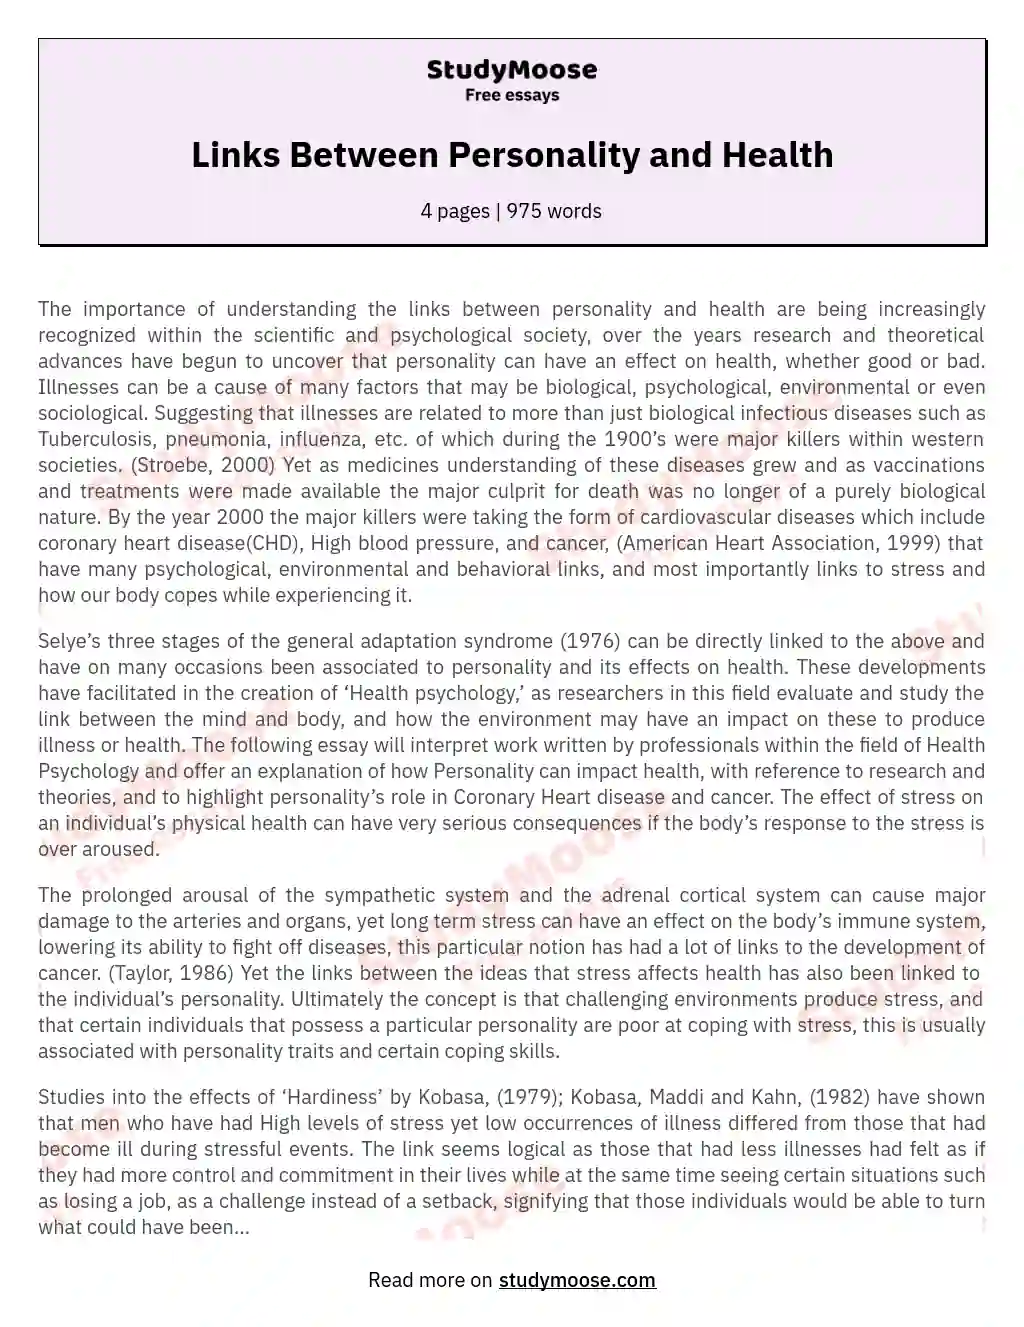 Links Between Personality and Health essay